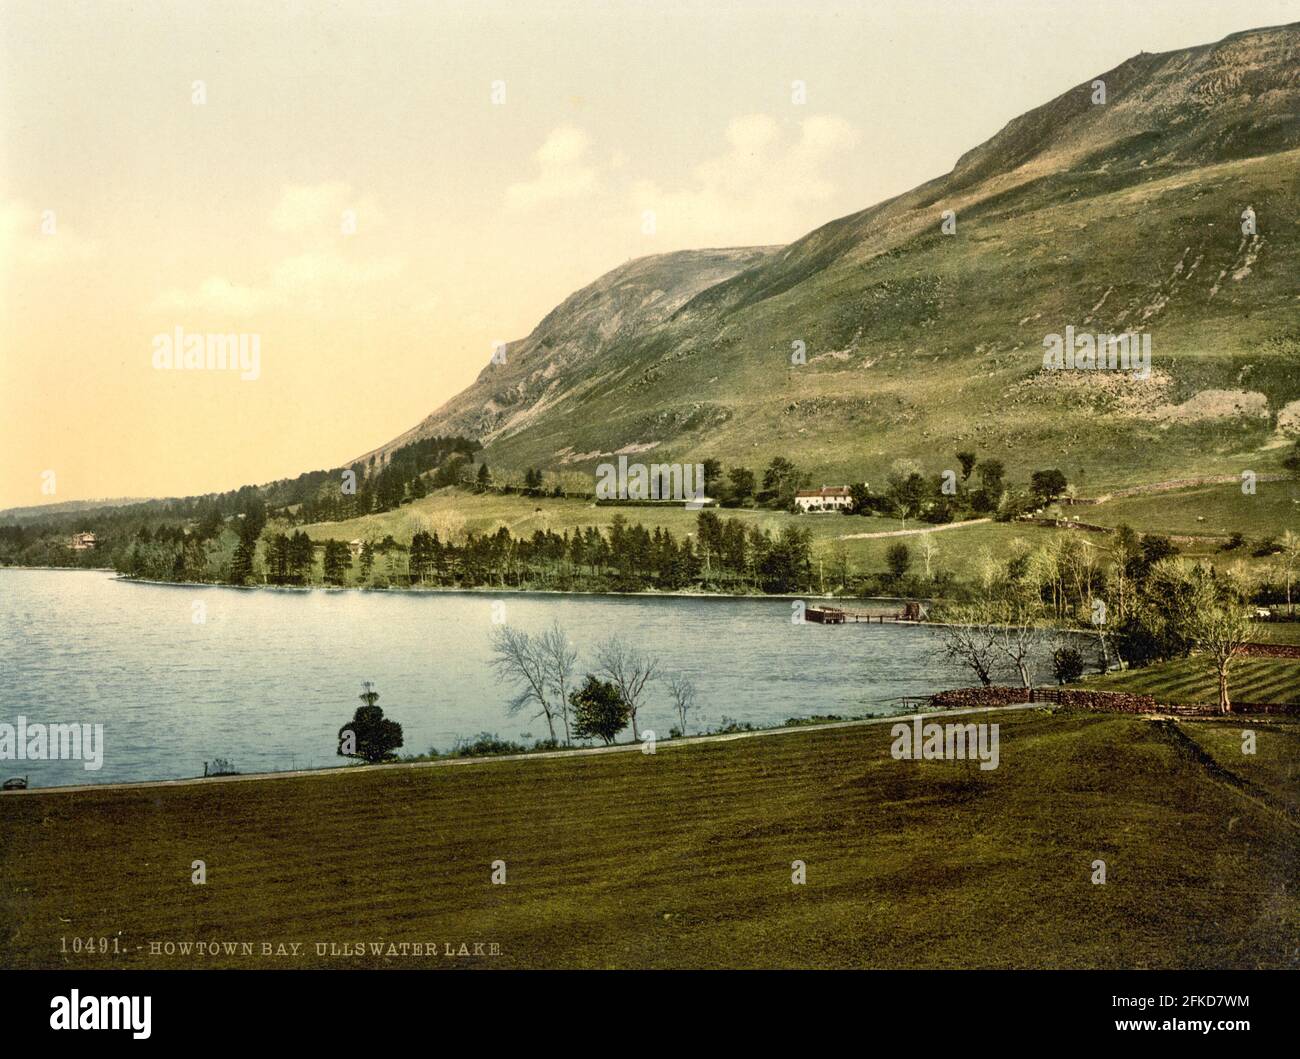 Howtown Bay on Ullswater in The Lake District, Cumbria circa 1890-1900 Stock Photo